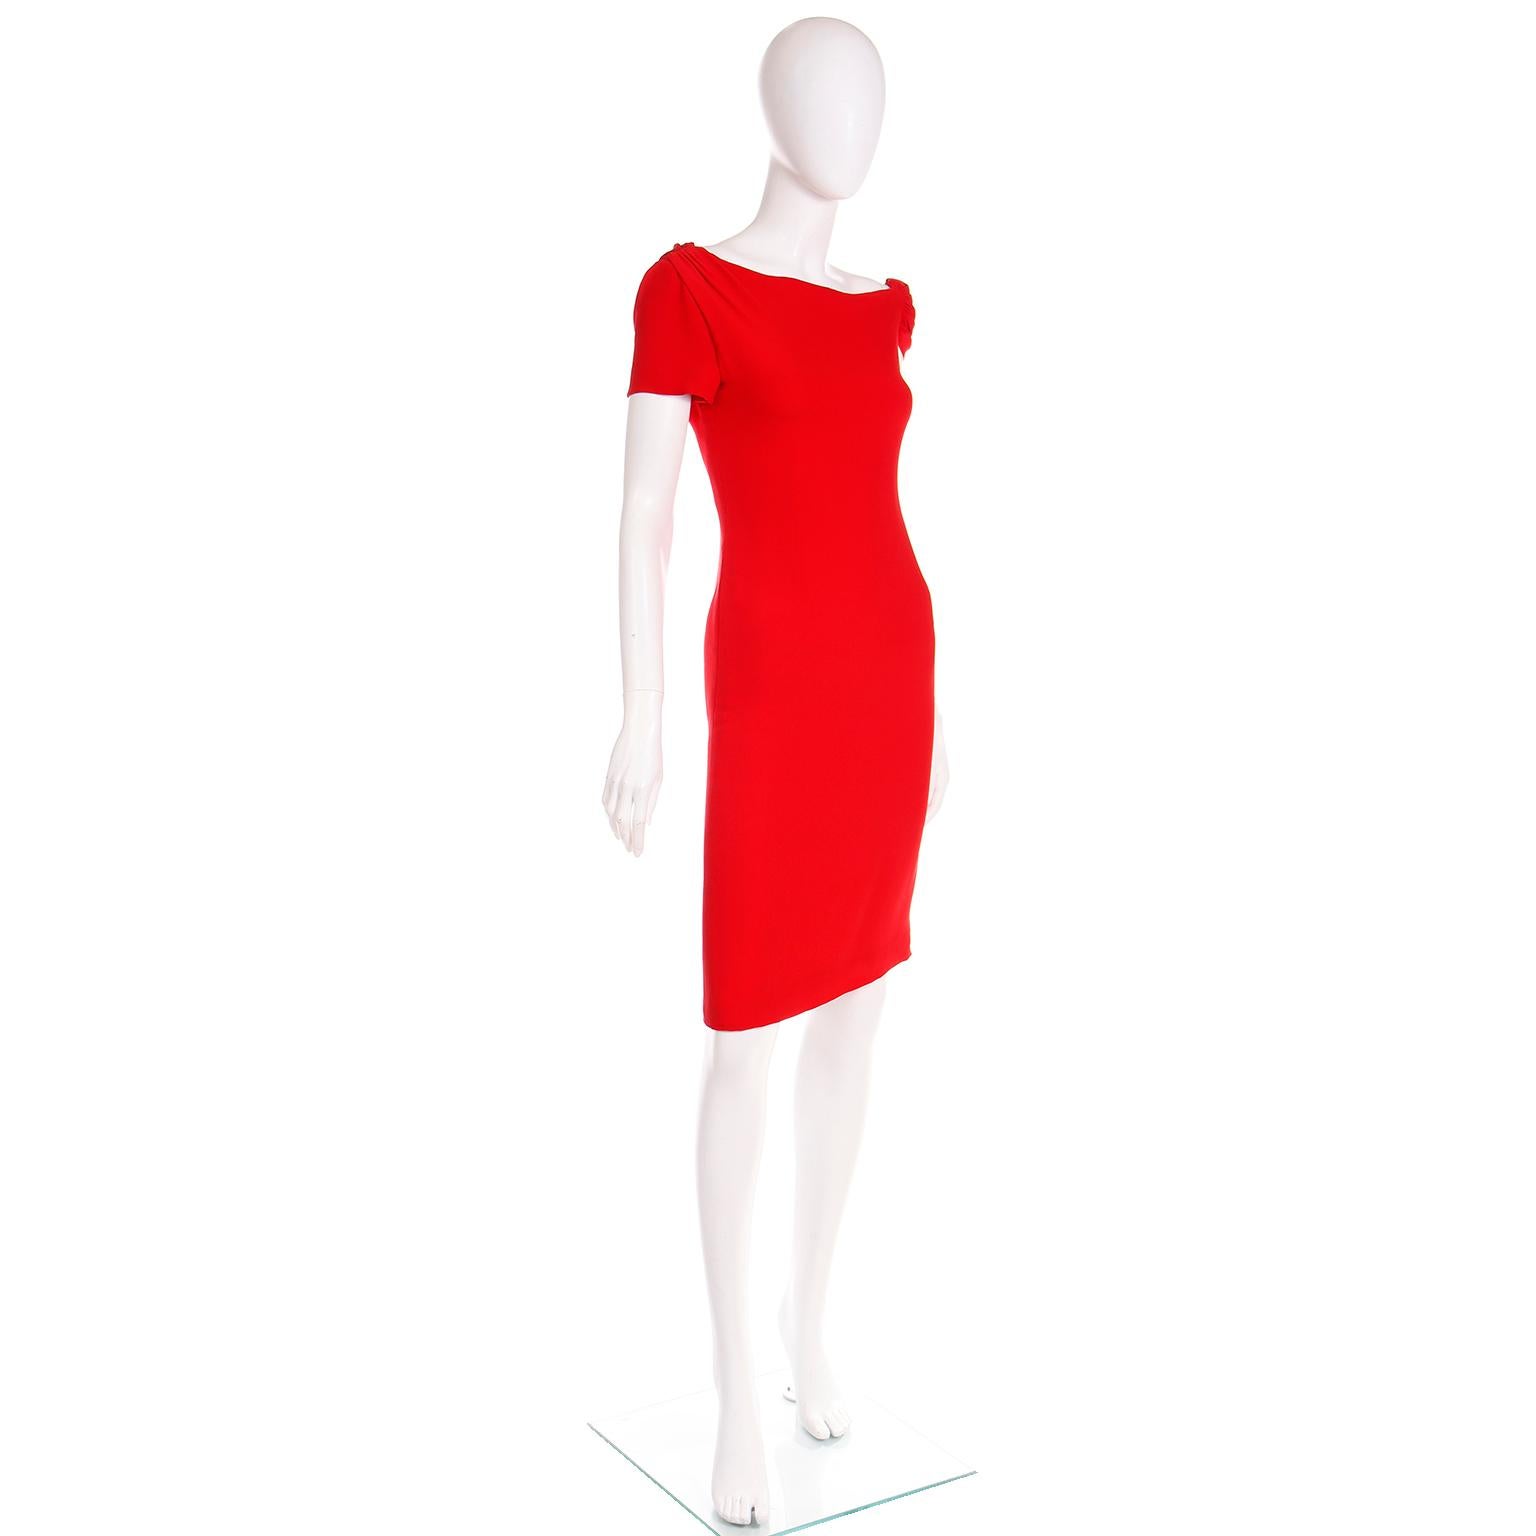 Valentino Garavani 2000s Red Silk Crepe Asymmetrical Sleeve Day or Evening Dress In Excellent Condition For Sale In Portland, OR